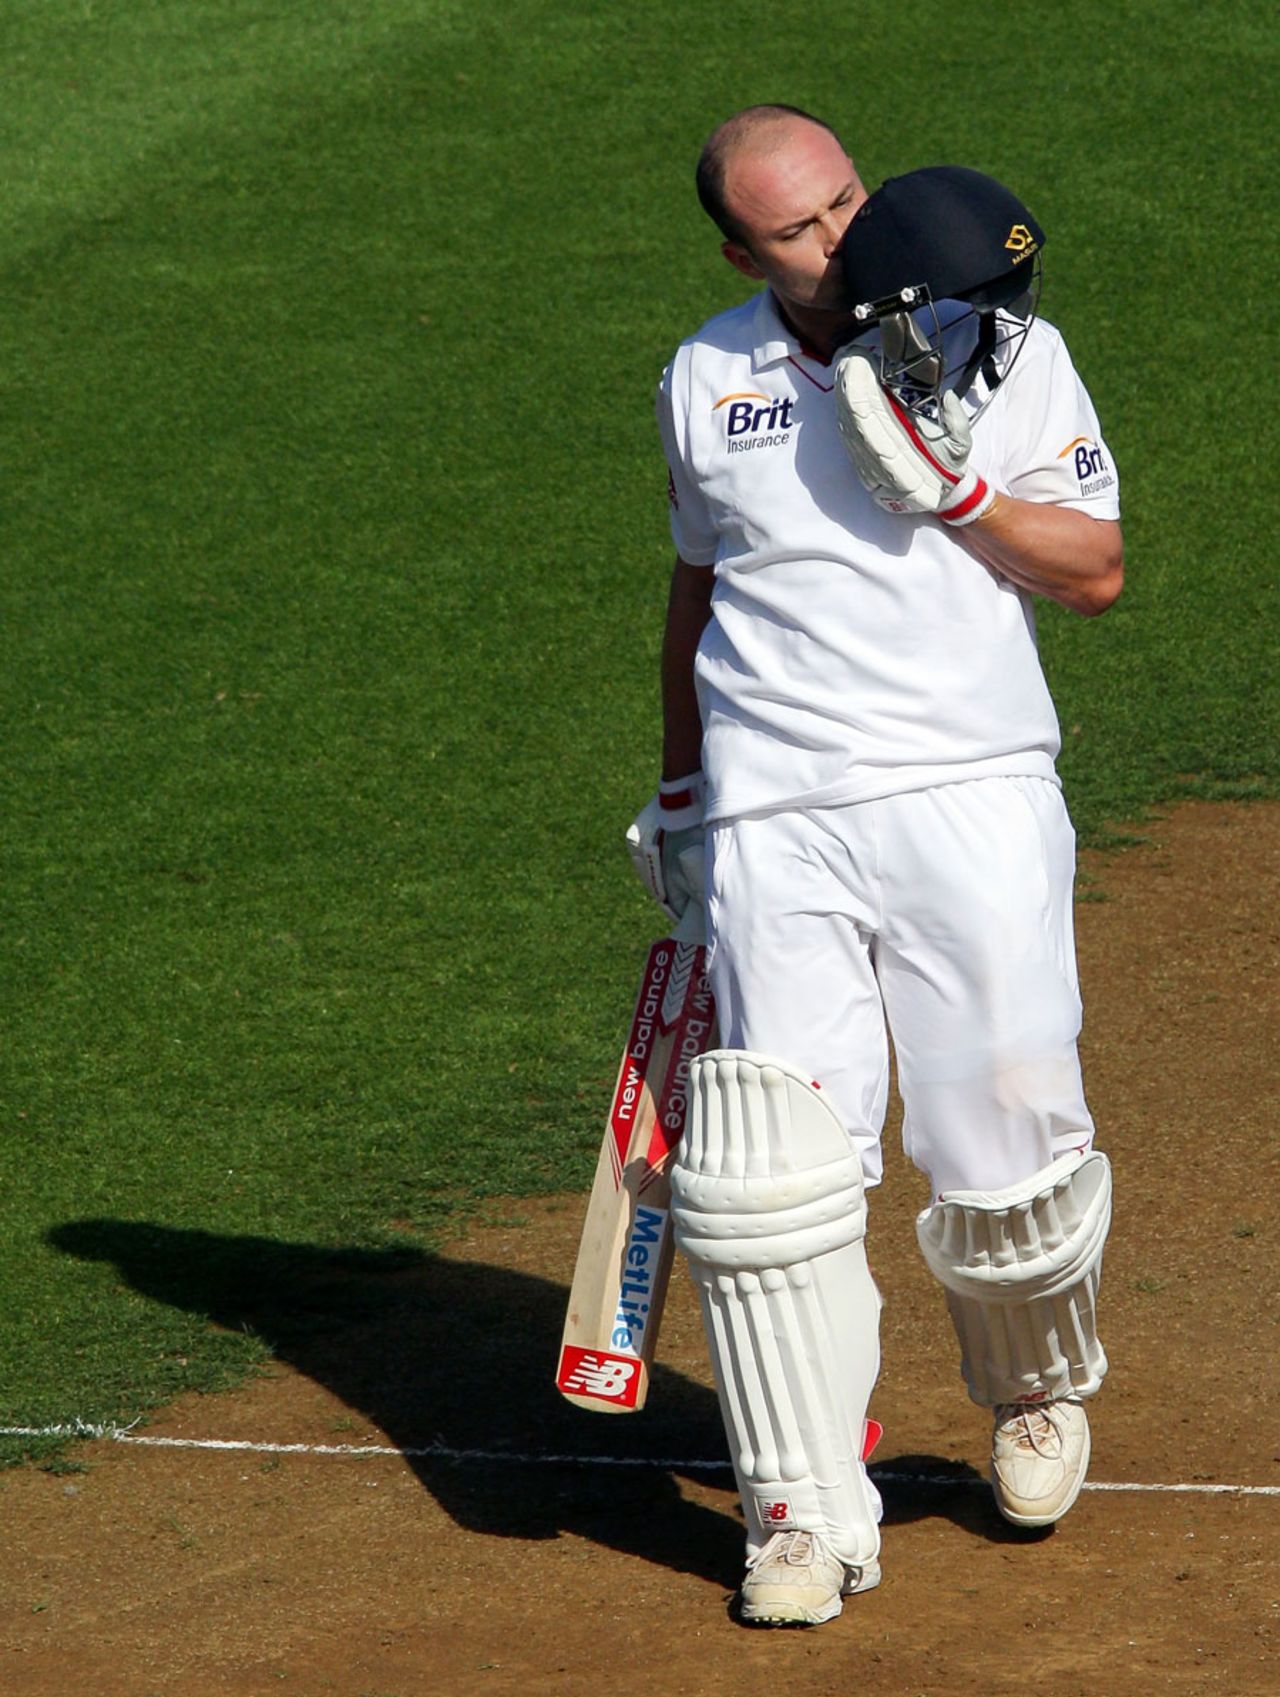 Jonathan Trott kisses his helmet after reaching his century, New Zealand v England, 2nd Test, Wellington, 1st day, March 14, 2013